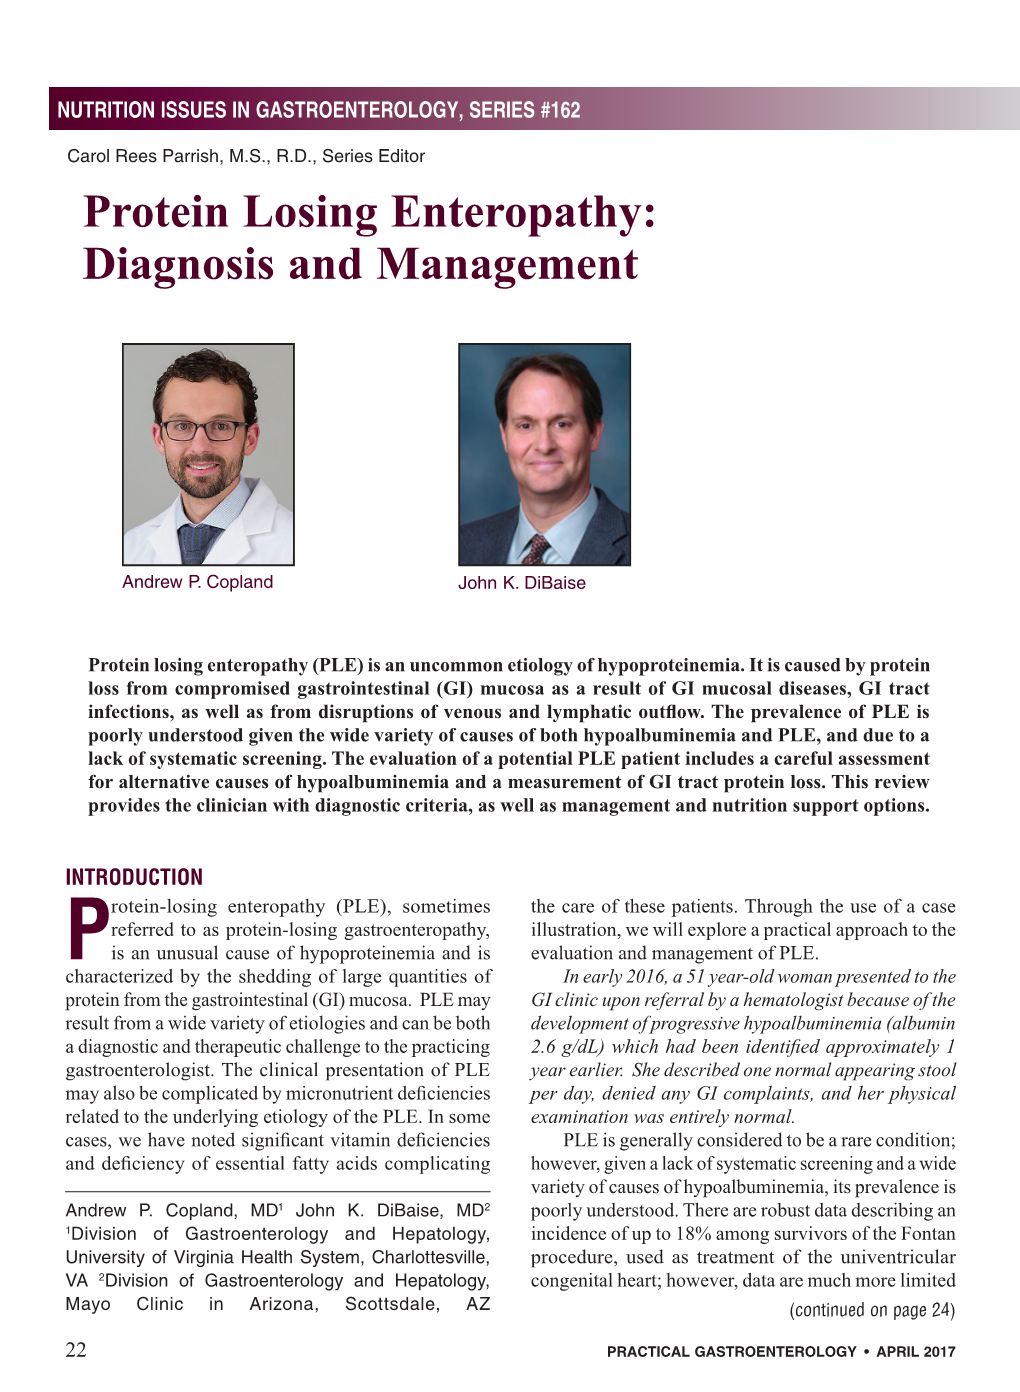 Protein Losing Enteropathy: Diagnosis and Management